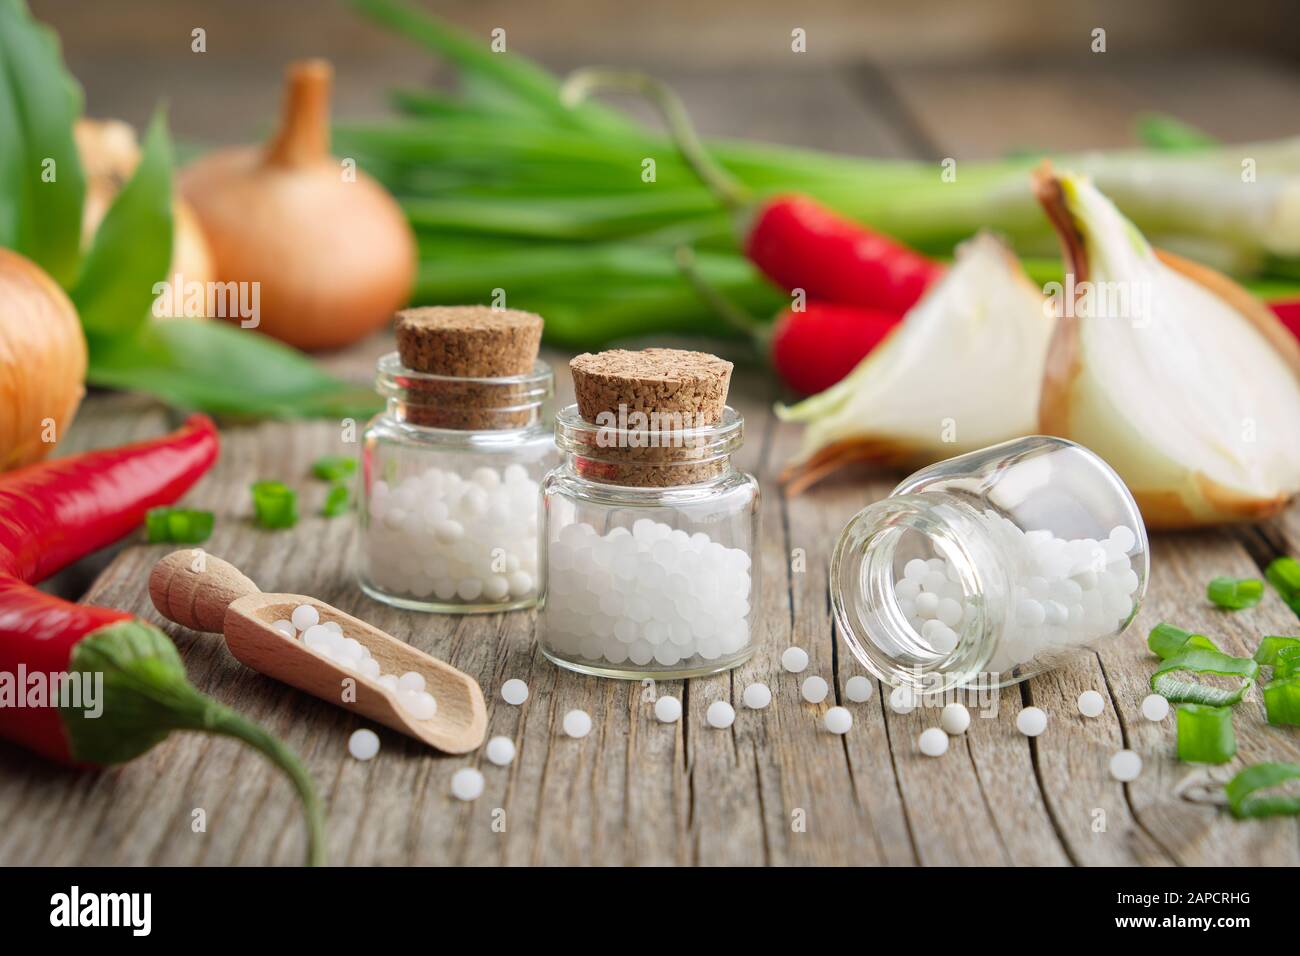 Onion bulbs, green onions, red chili peppers and bottles of homeopathic globules. Allium cepa and capsicum homeopathic remedies. Stock Photo